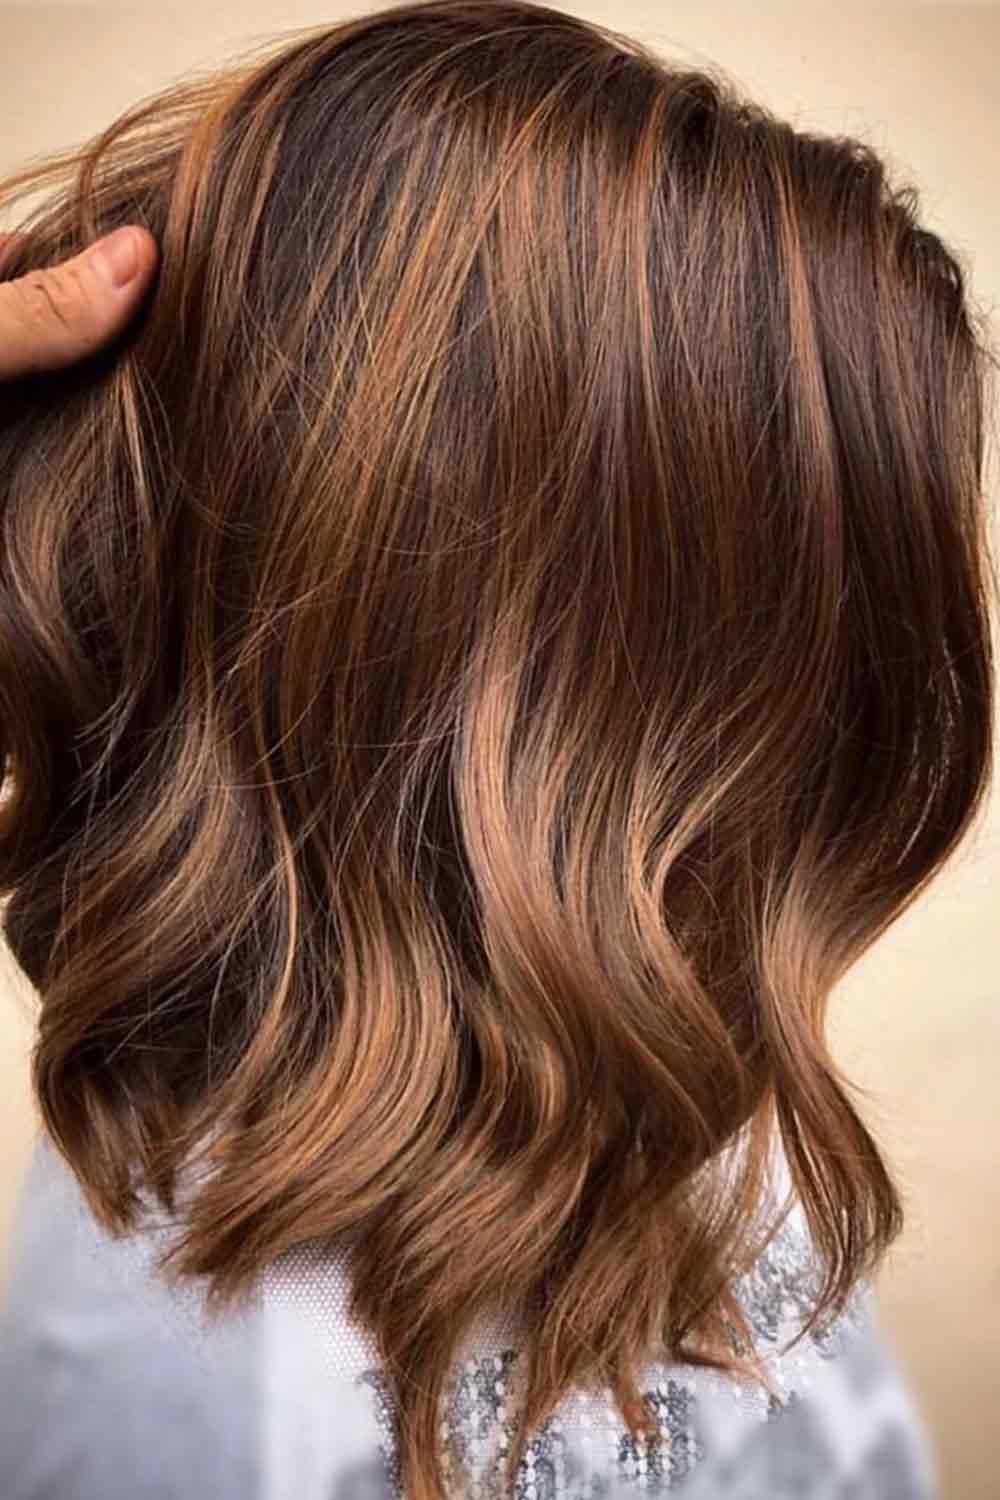 Wavy Long Bob With Textured Ends #texturedhaircut #hairhighlights